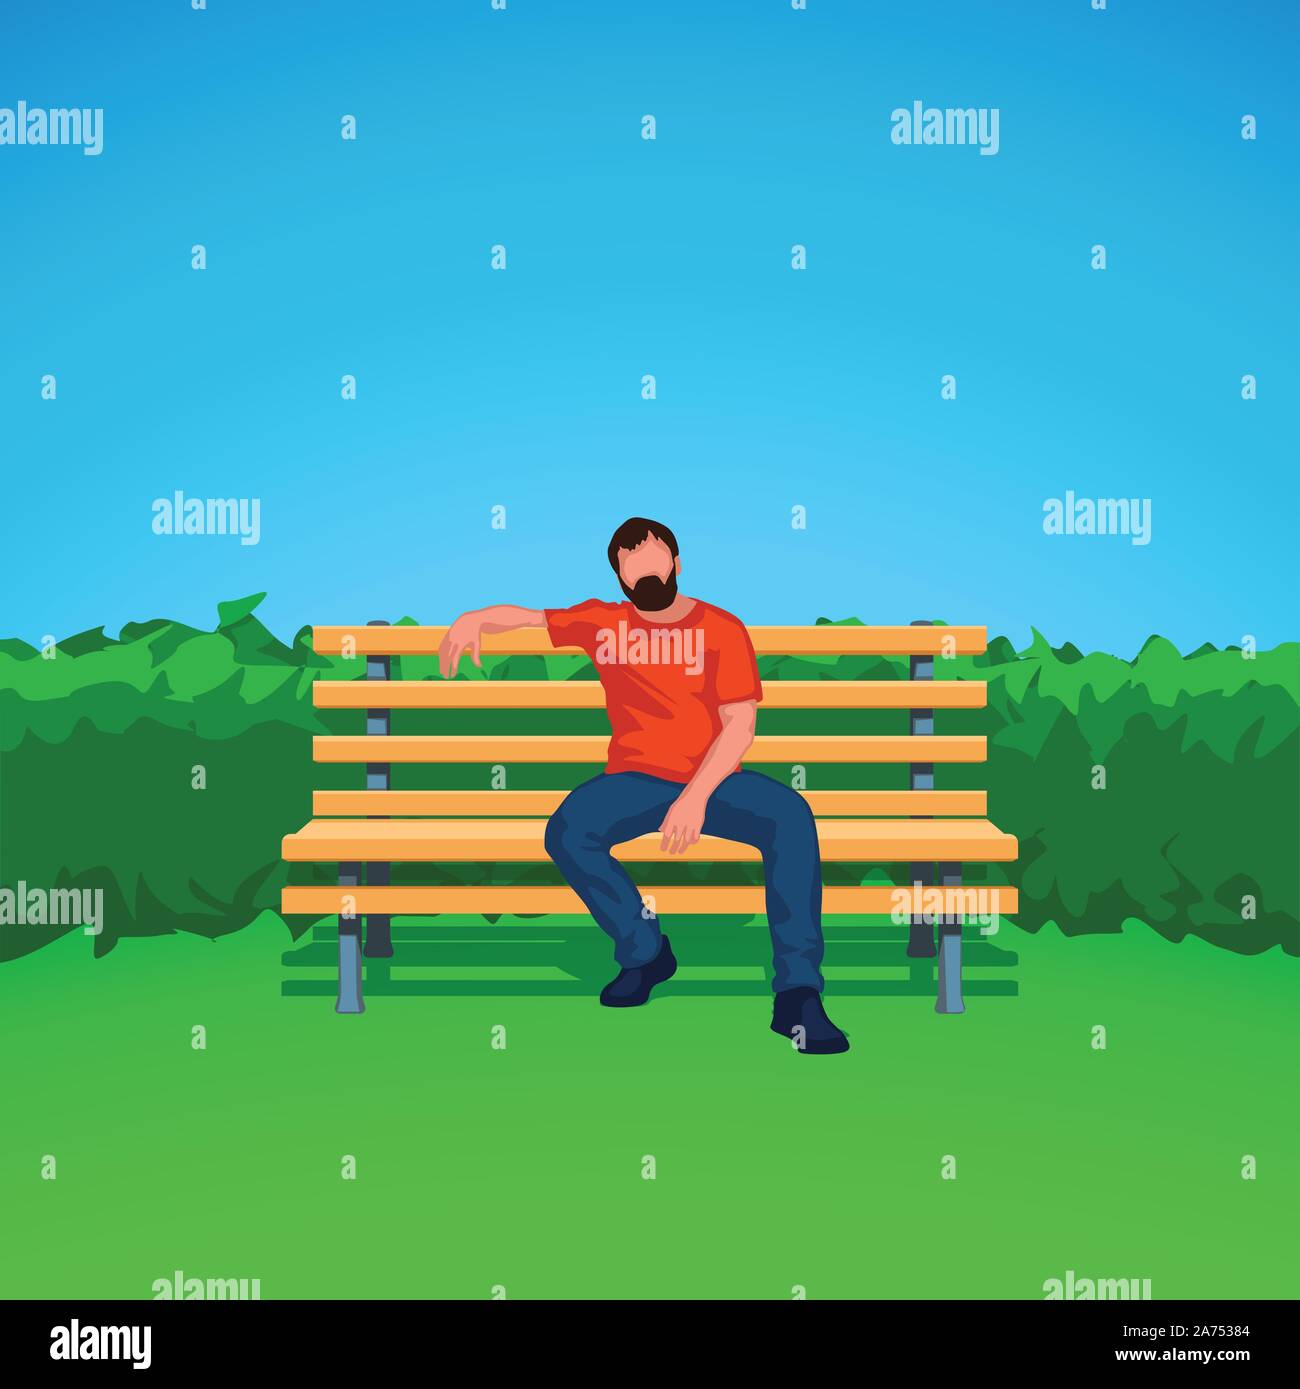 male silhouette on bench Stock Vector